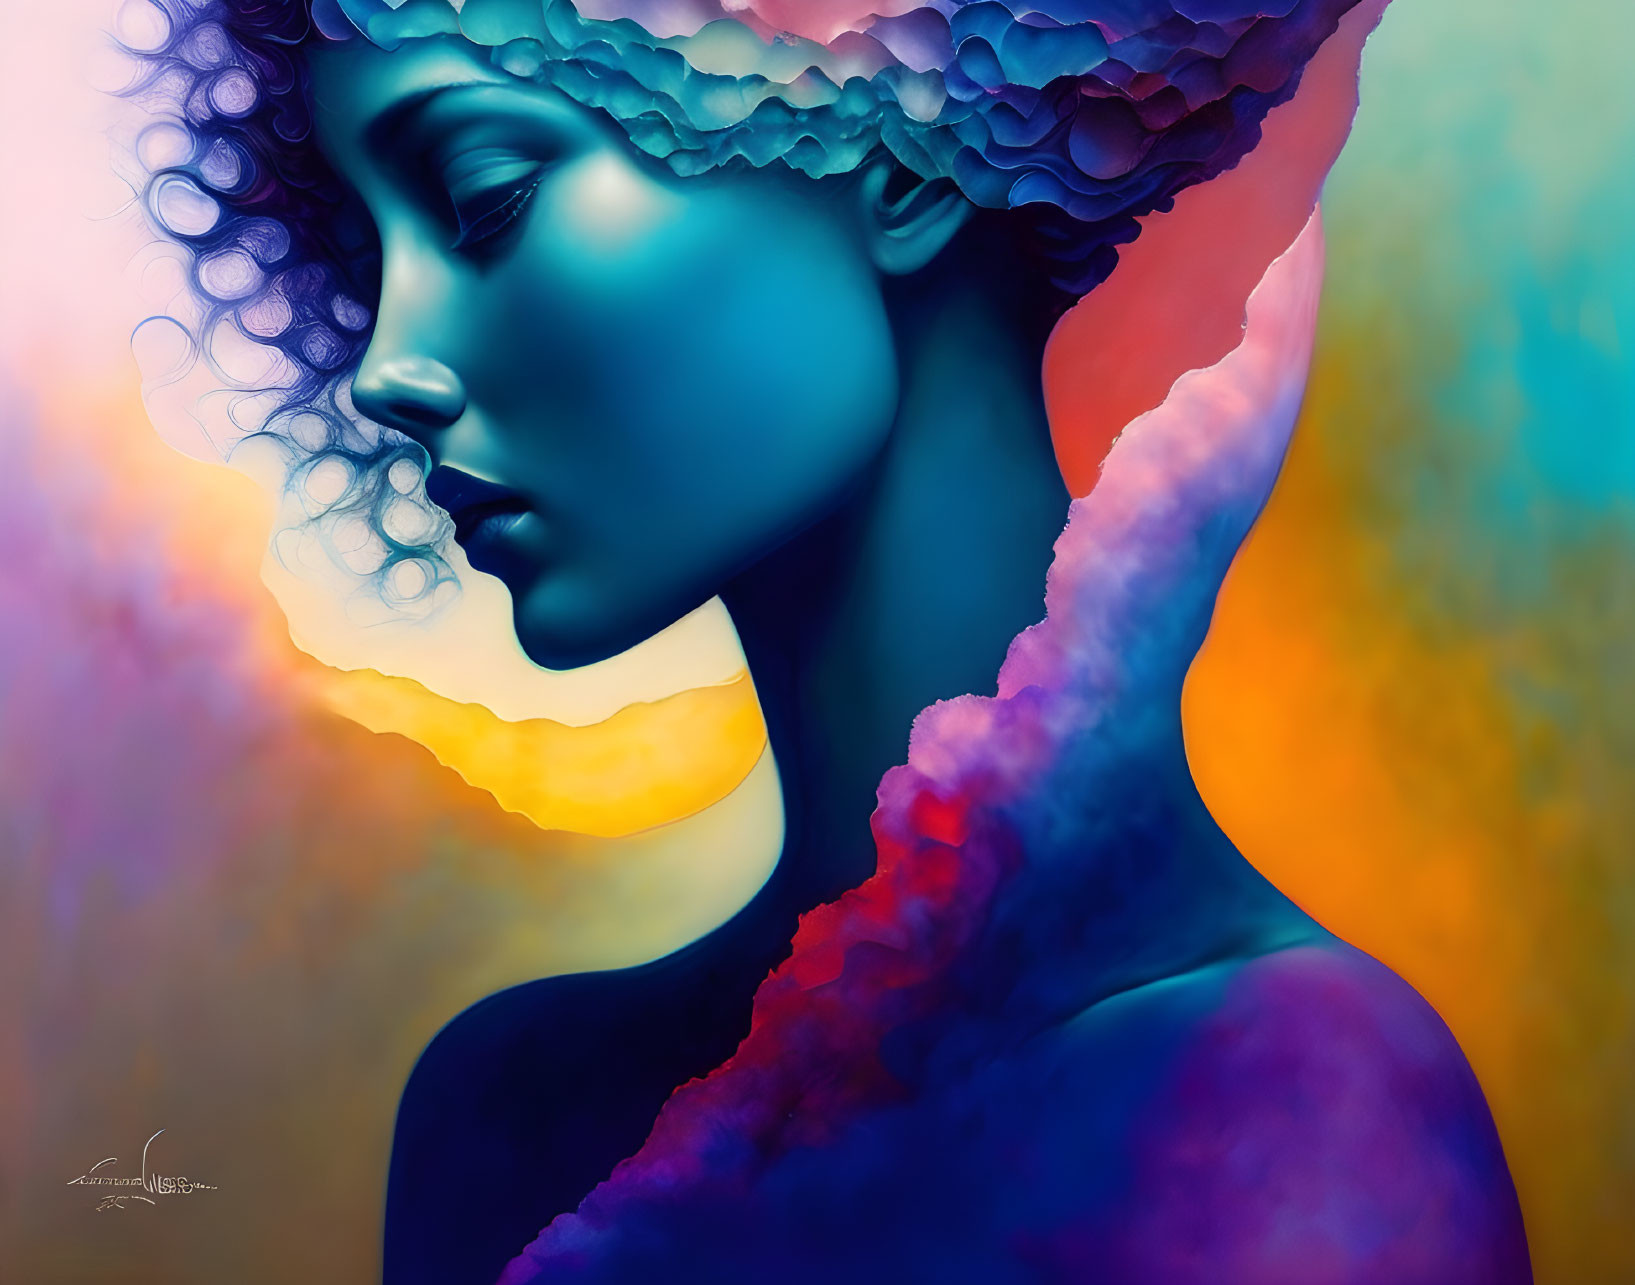 Colorful digital painting of woman with blue skin and ornate headpiece